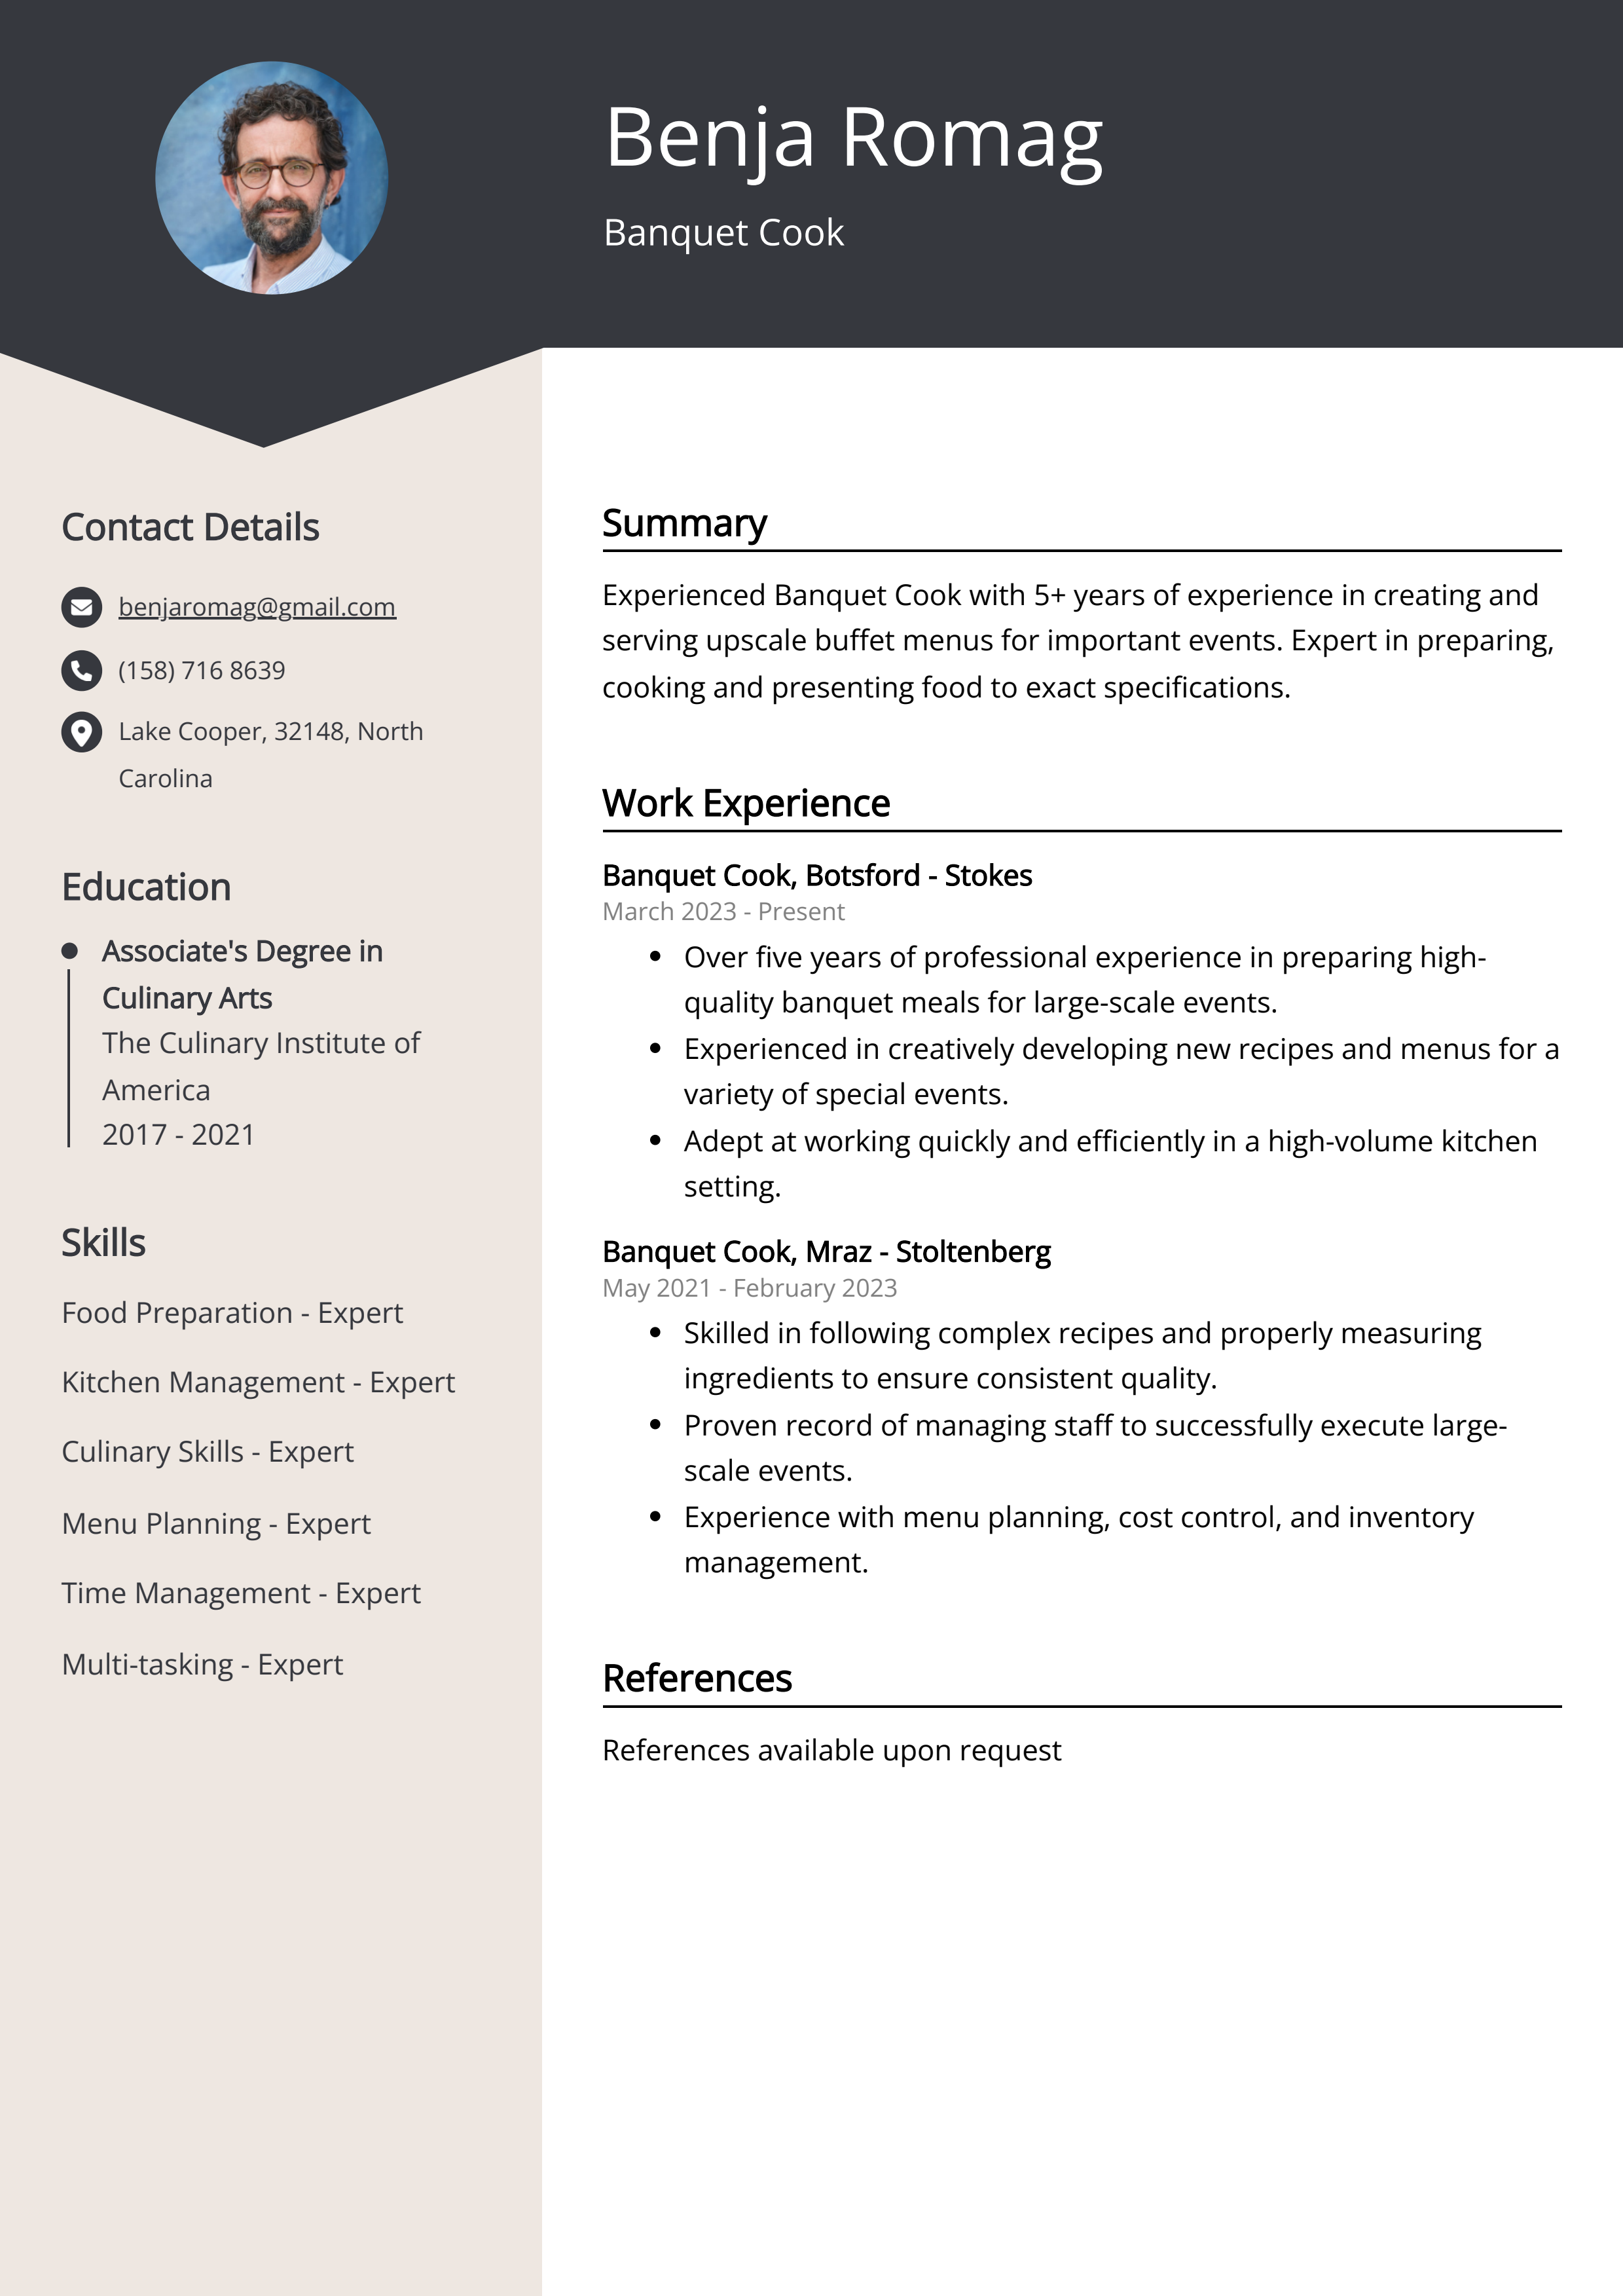 Banquet Cook Resume Example